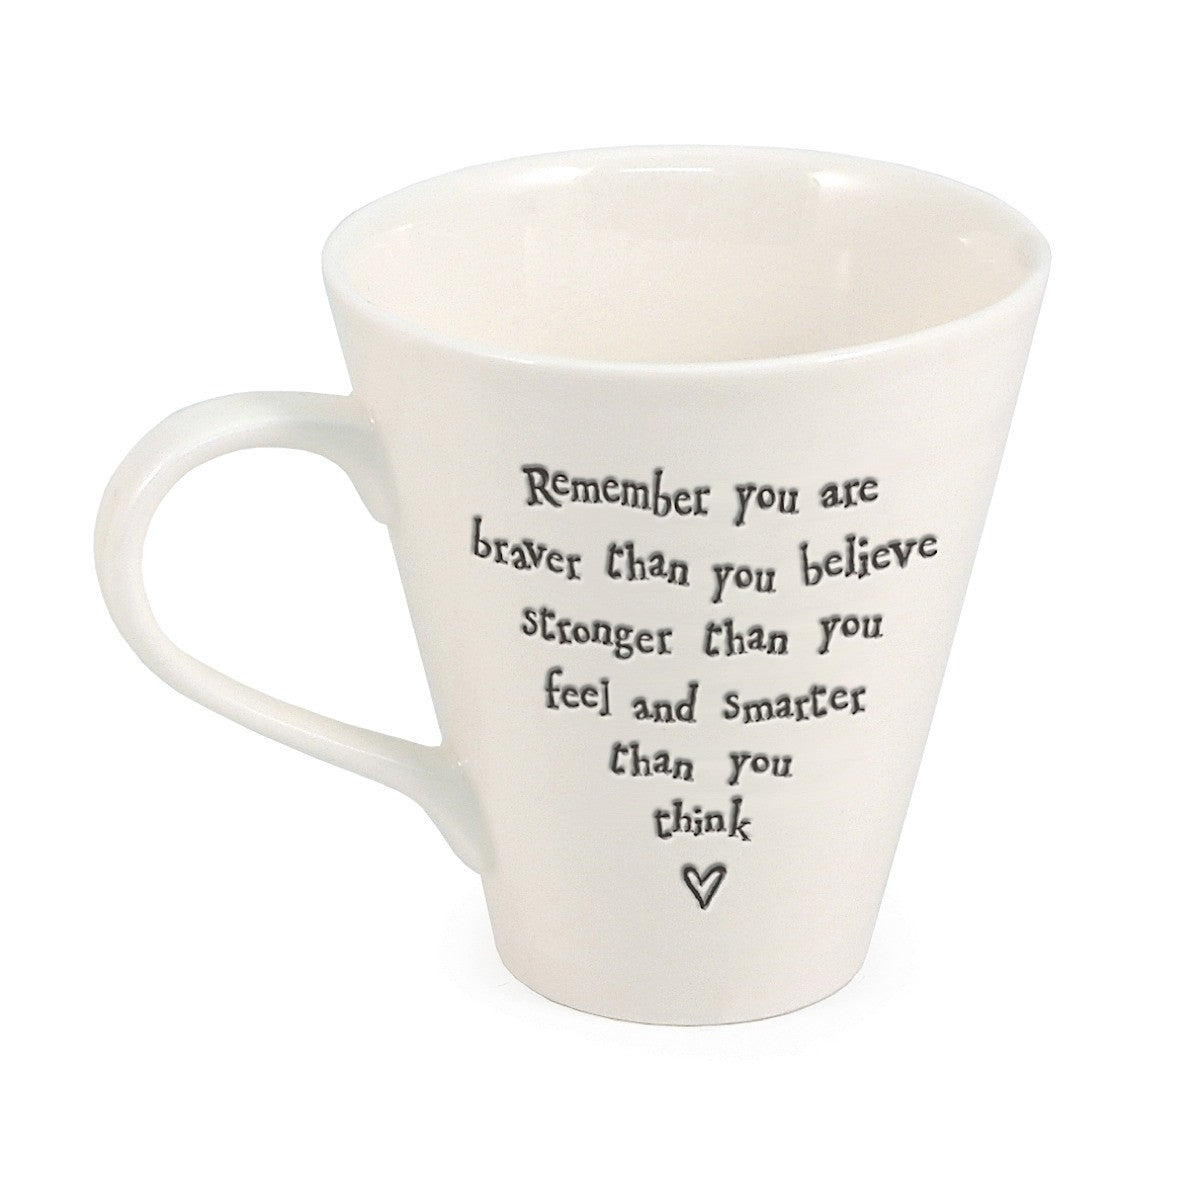 Porcelain Mug - Remember You Are Braver Than You Believe | More Than Just at Gift | Narborough Hall